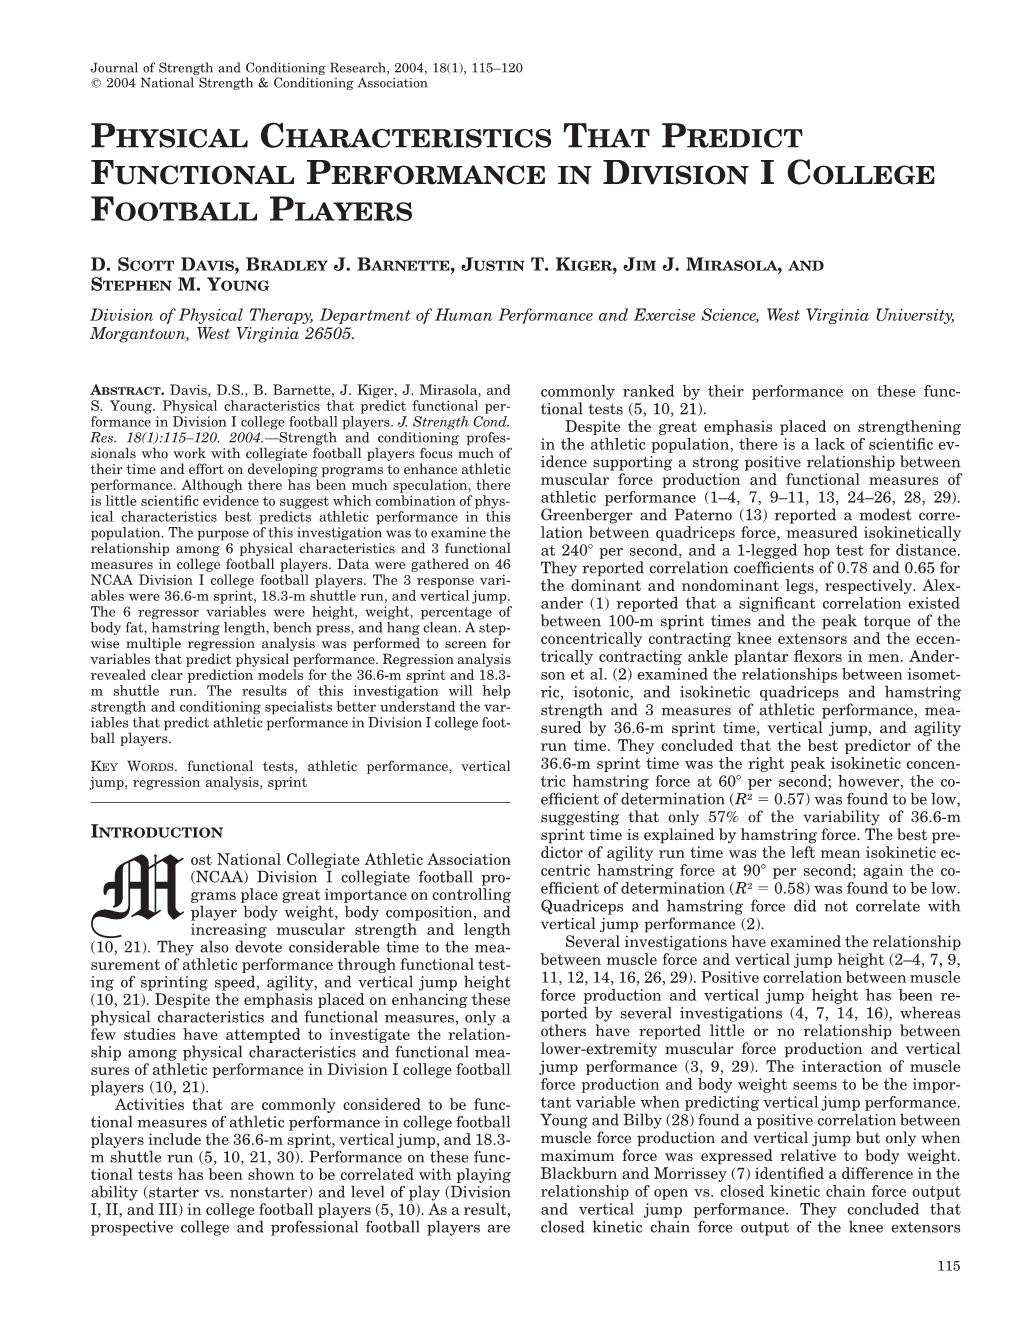 Physical Characteristics That Predict Functional Performance in Division I College Football Players